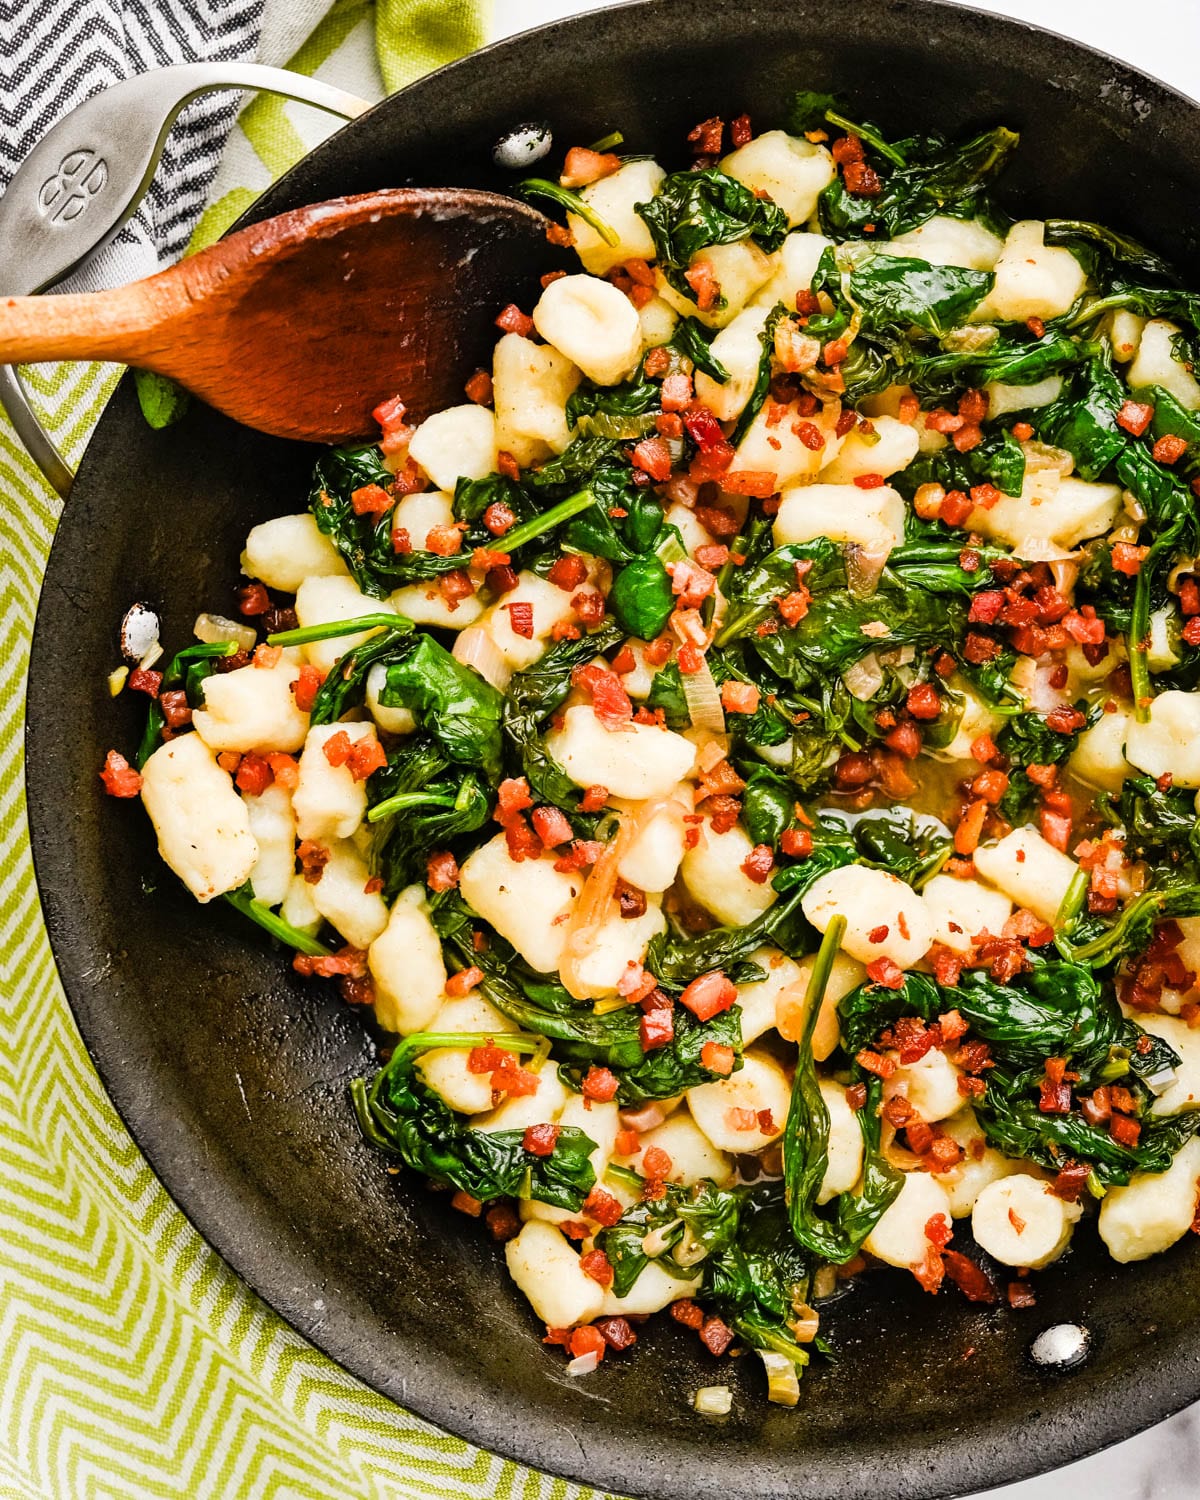 Adding pancetta to the Italian gnocchi and spinach to serve.